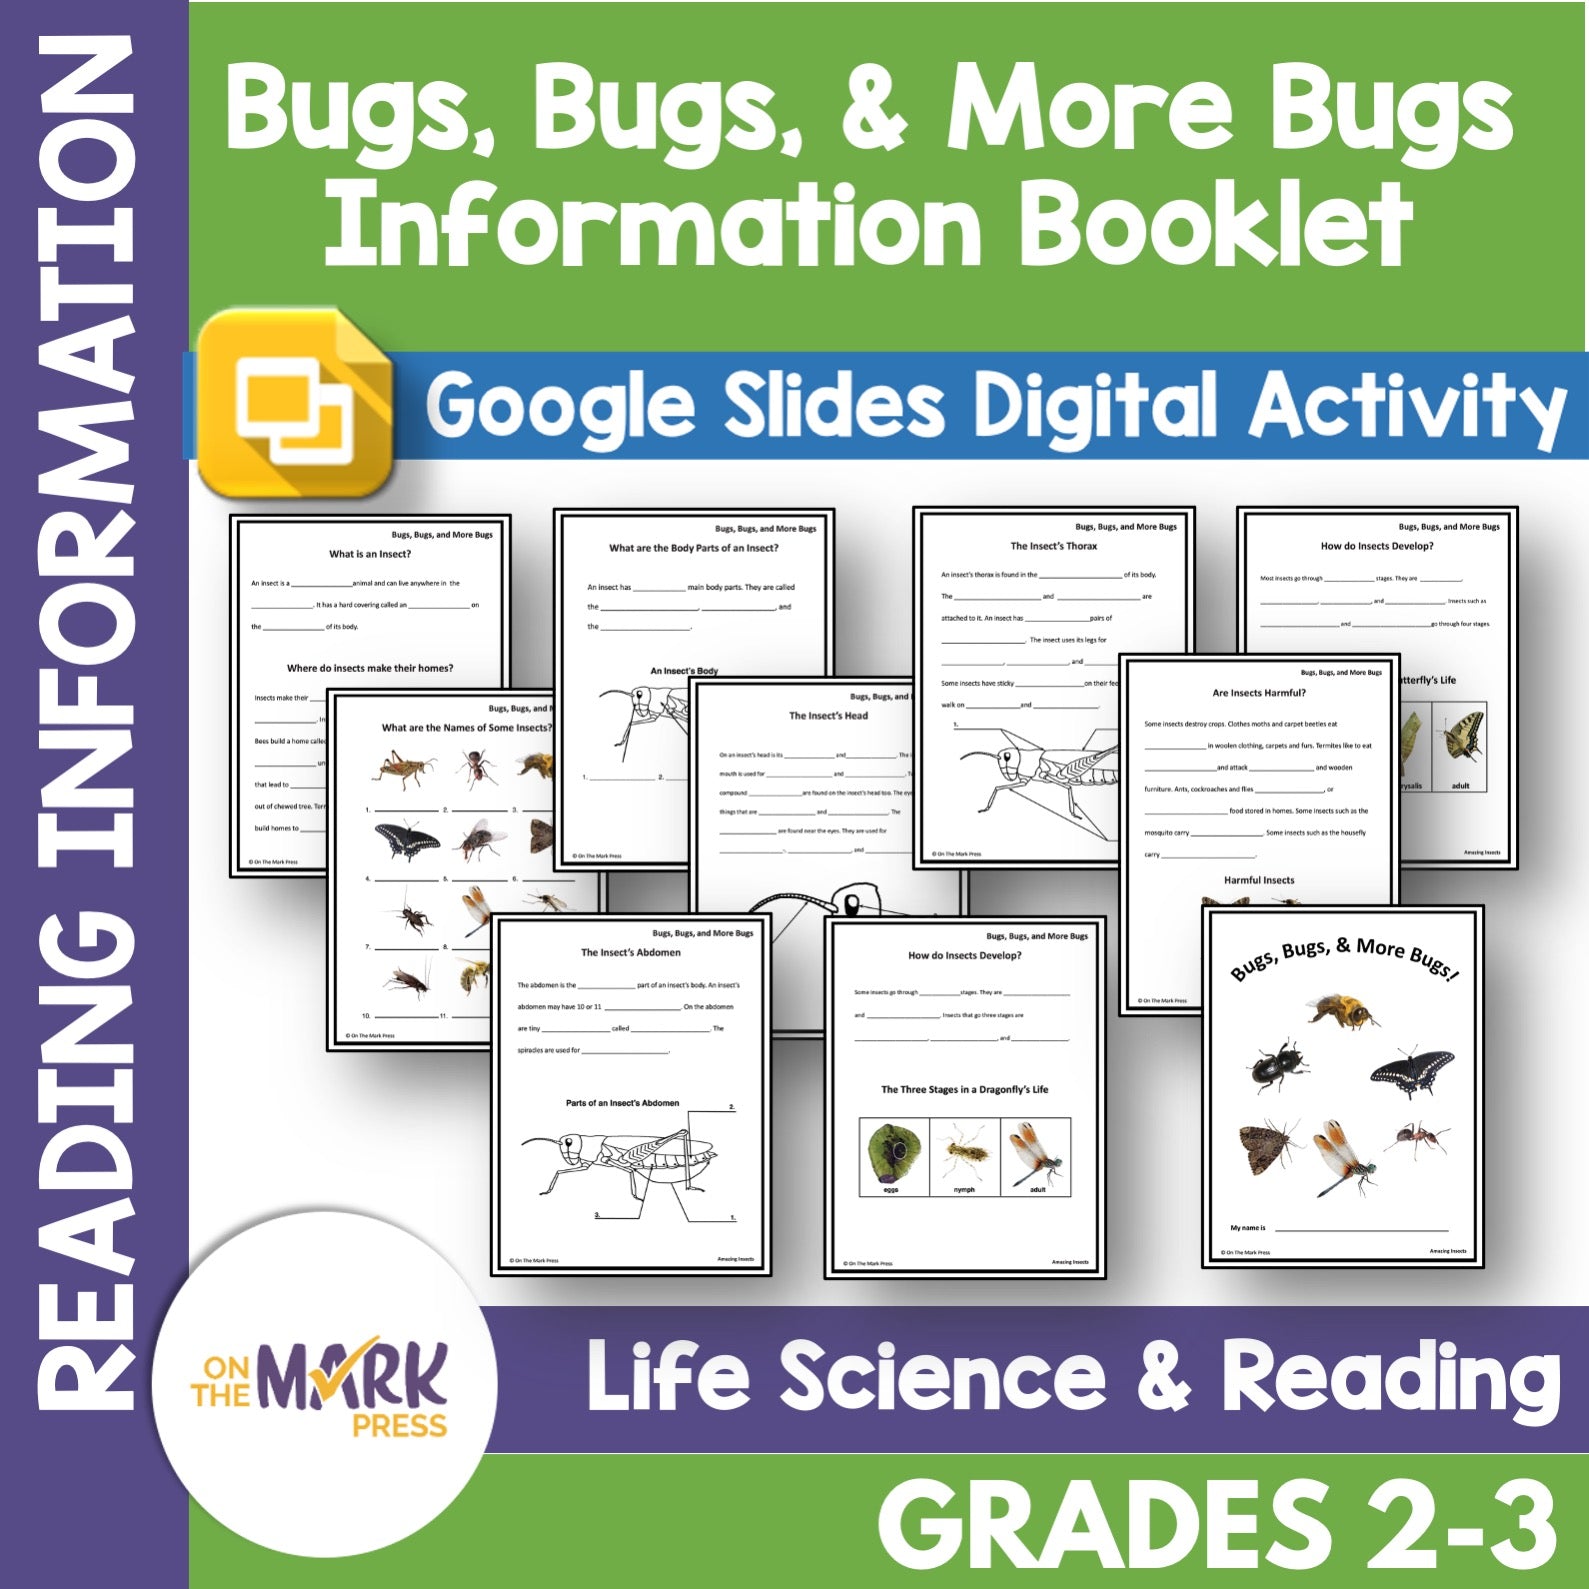 Bugs, Bugs & More Bugs Reproducible Student Booklet Grades 2-3 Google Slides & Printables